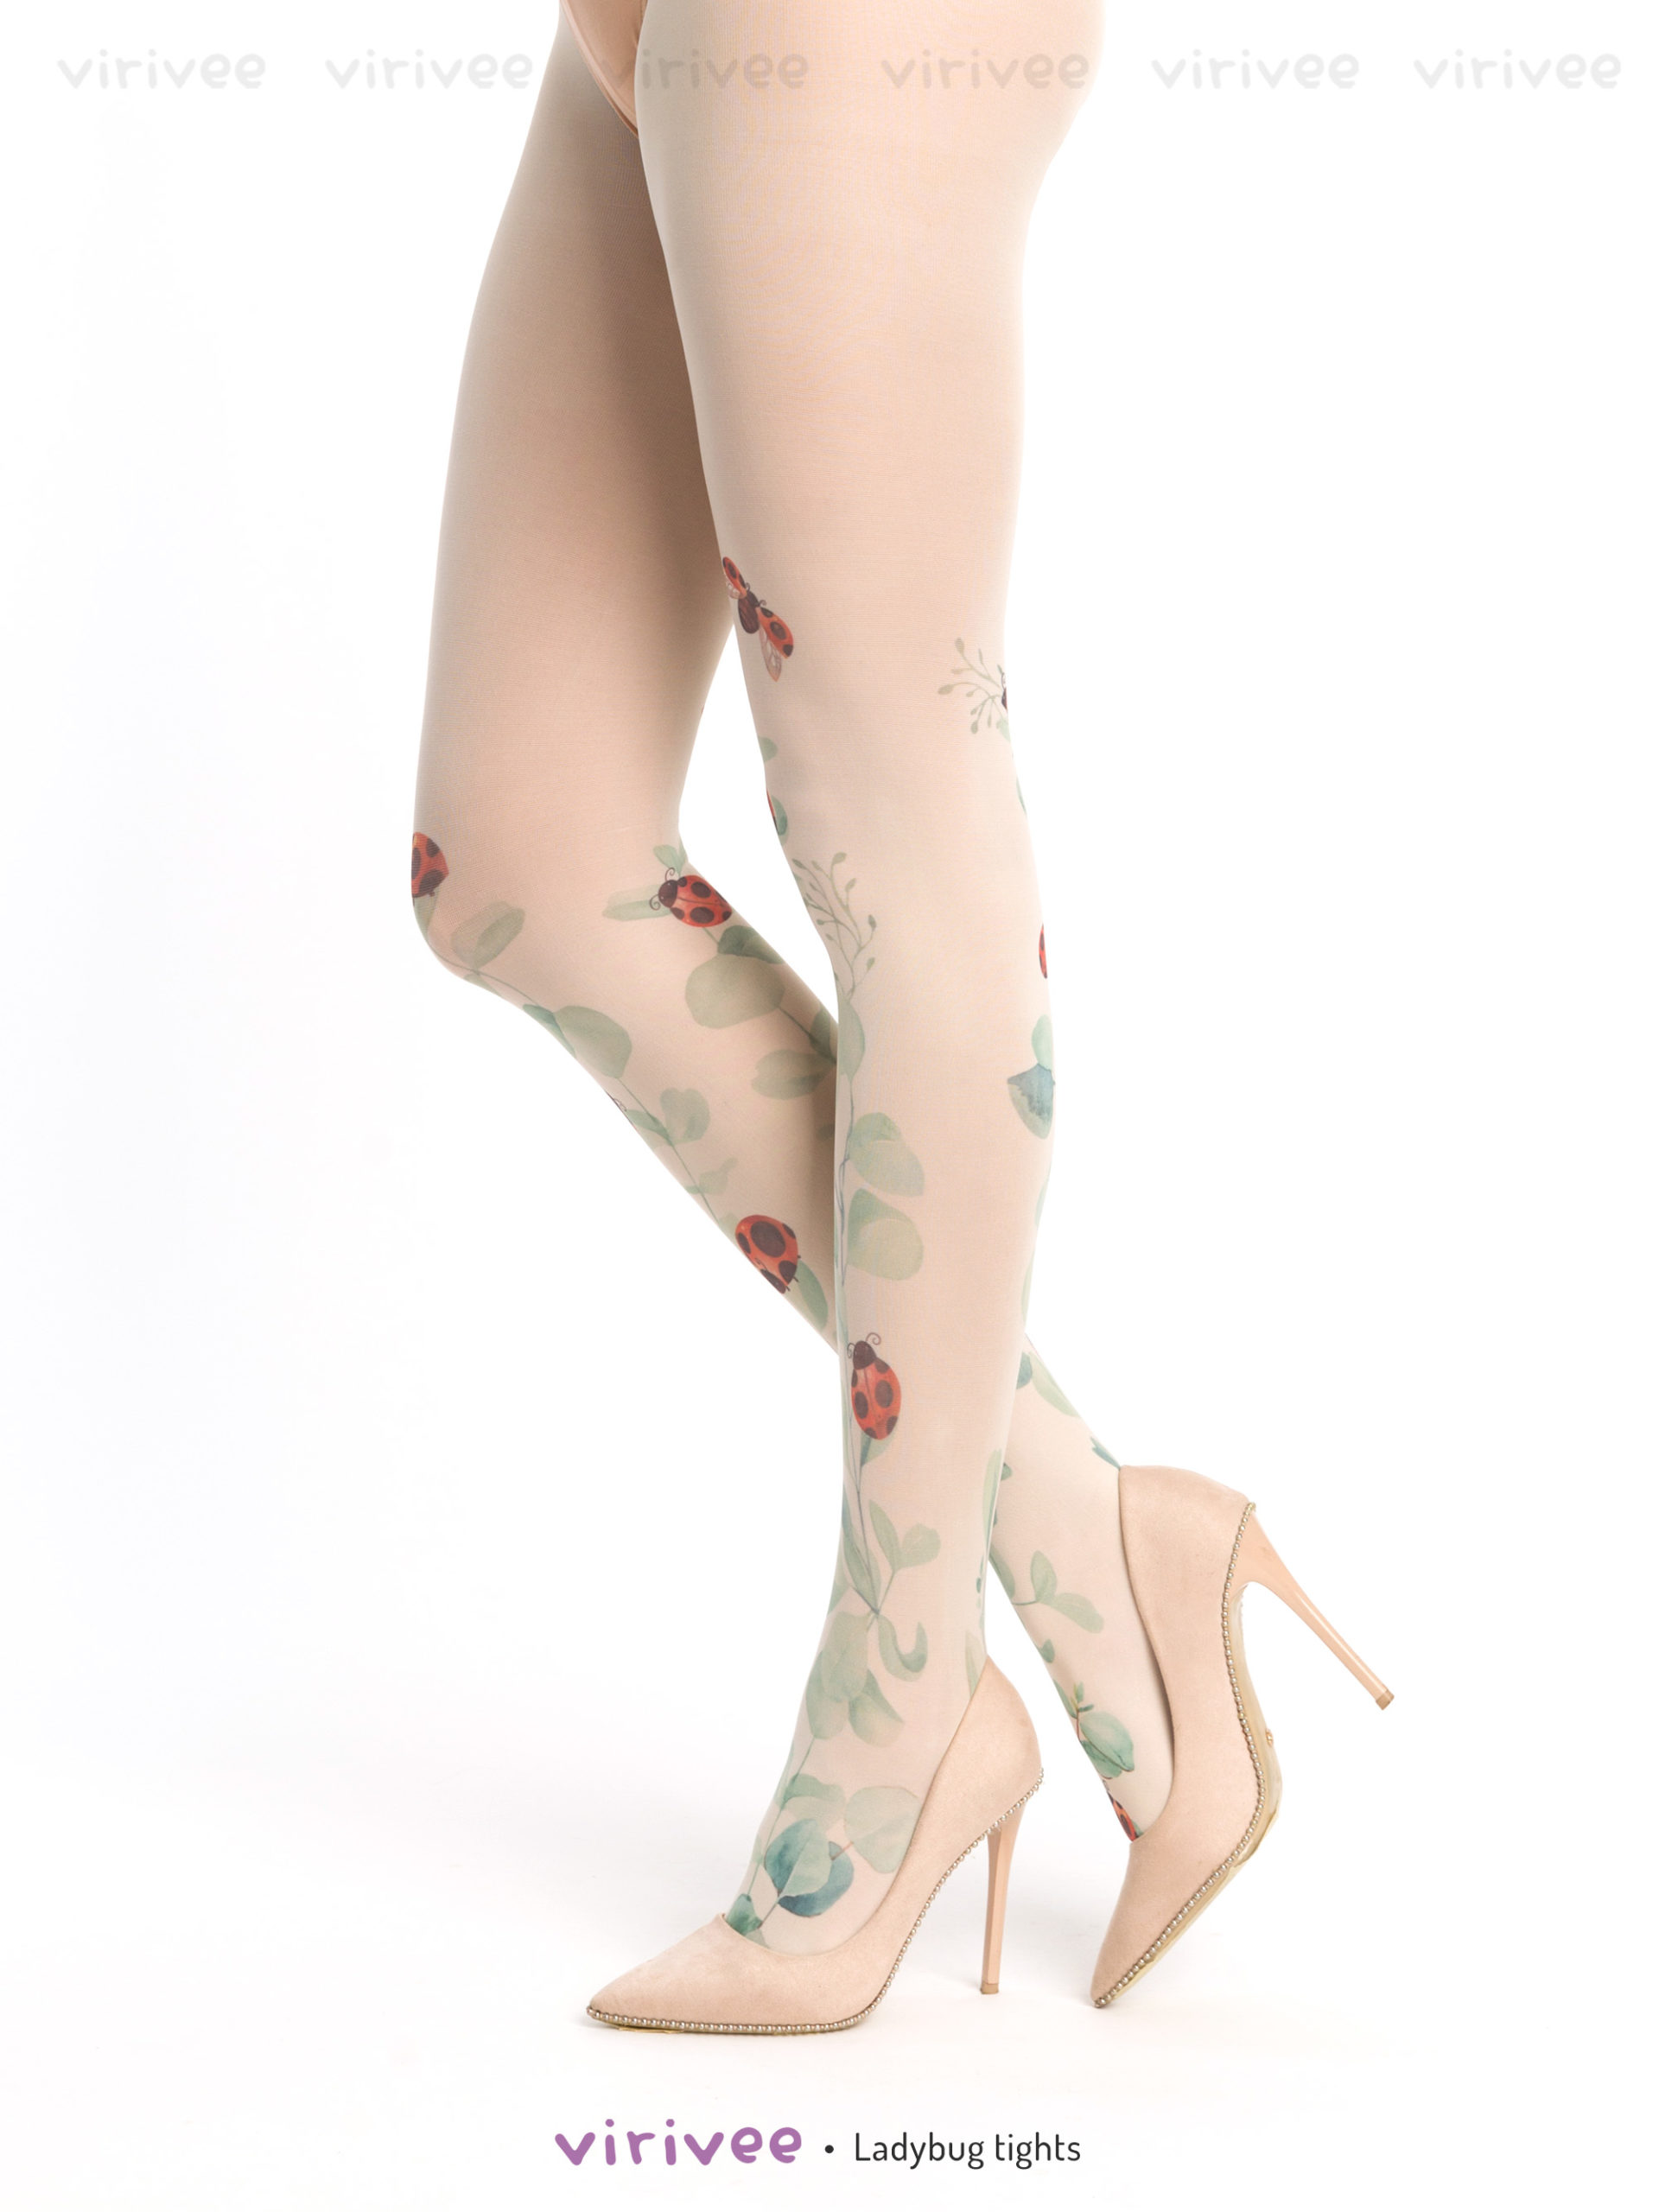 Floral tights - Virivee Tights - Unique tights designed and made in Europe